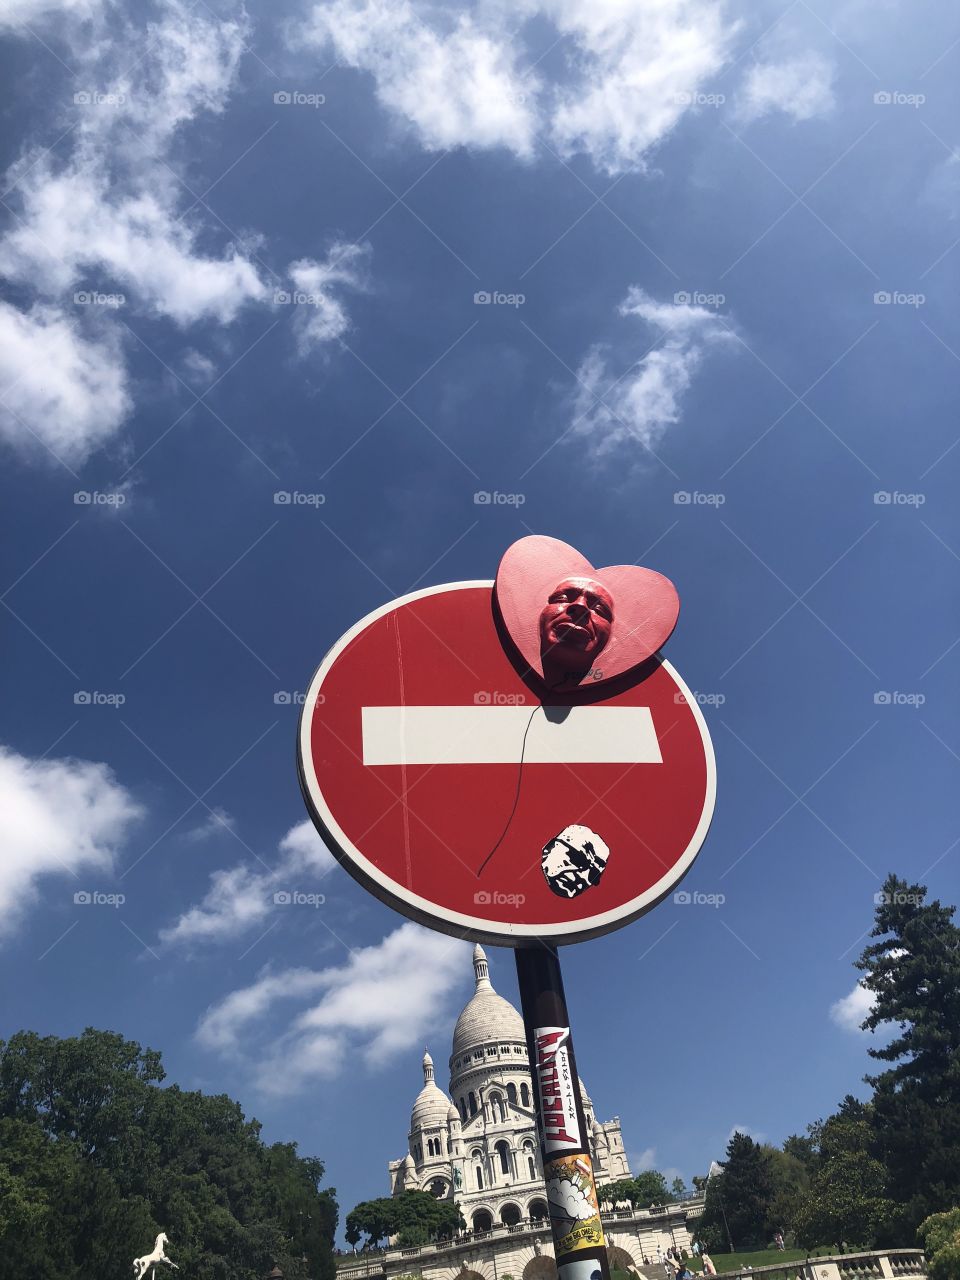 Bright red sign with heart